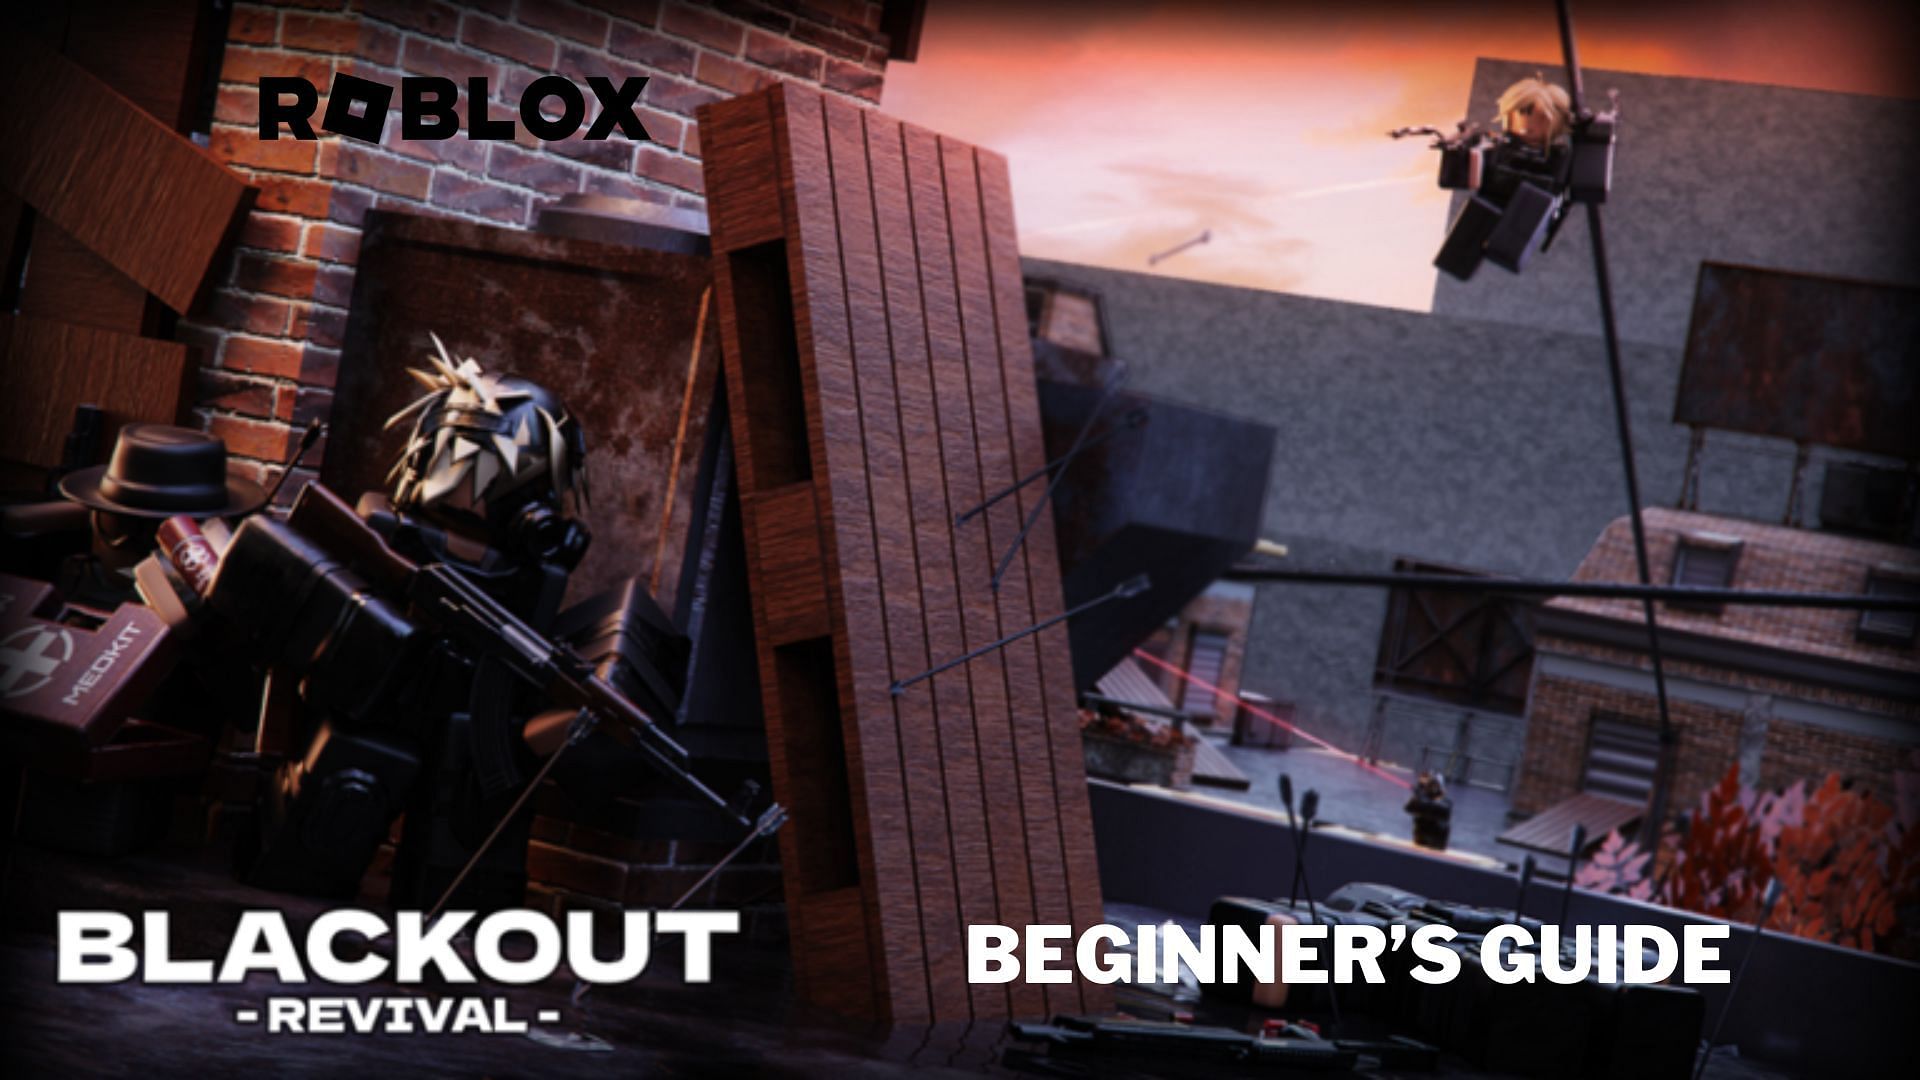 Featured image of Blackout: Revival (Image via Roblox and Sportskeeda)